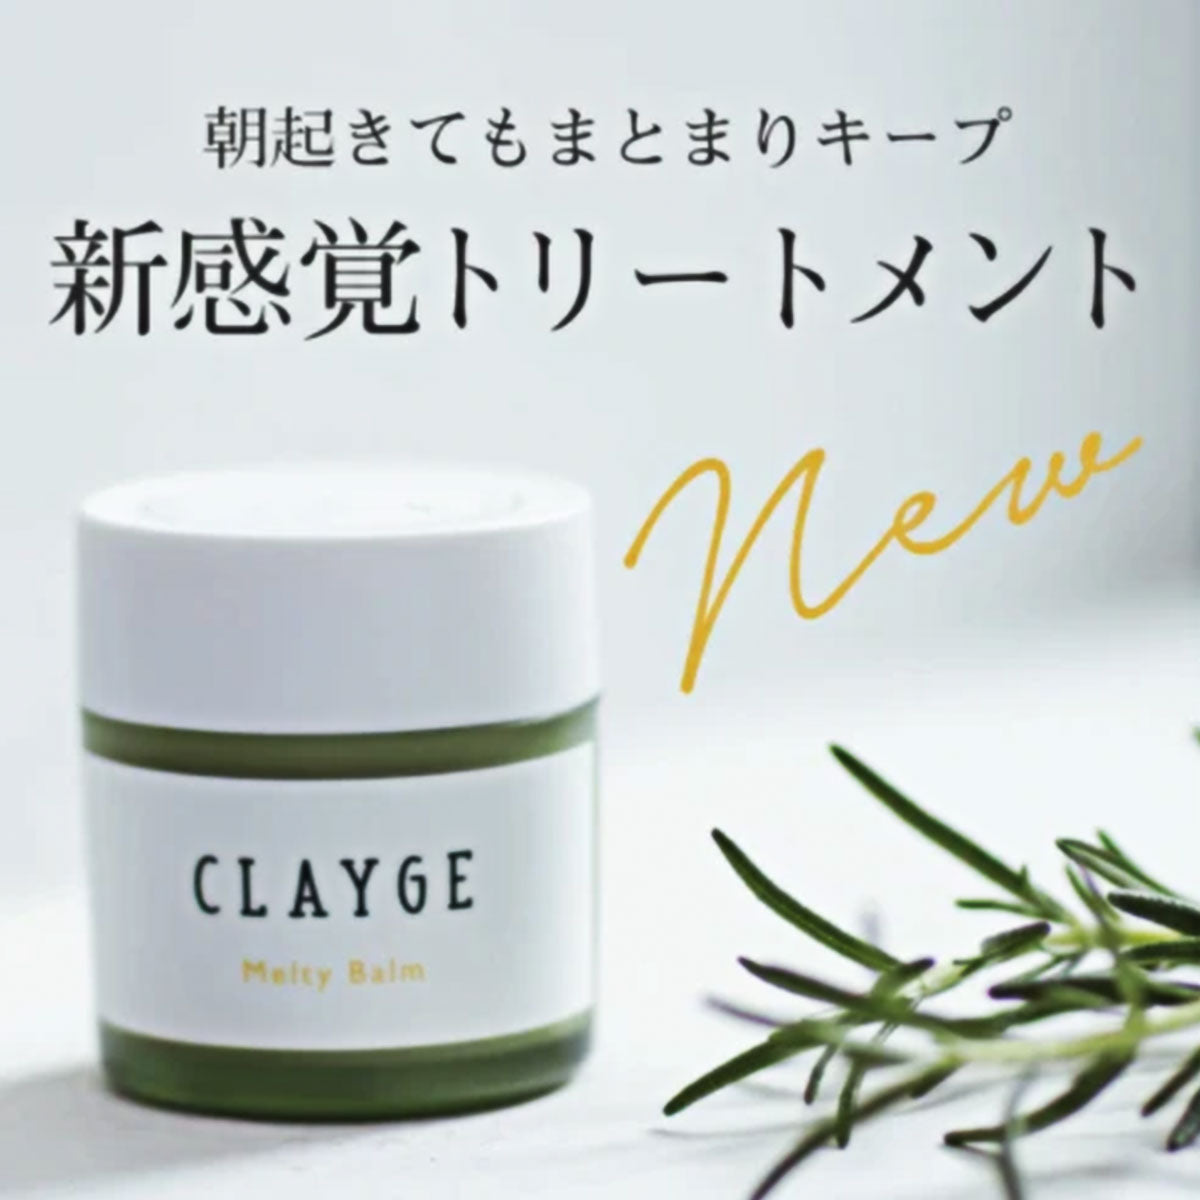 Clayge Melty Balm 40g